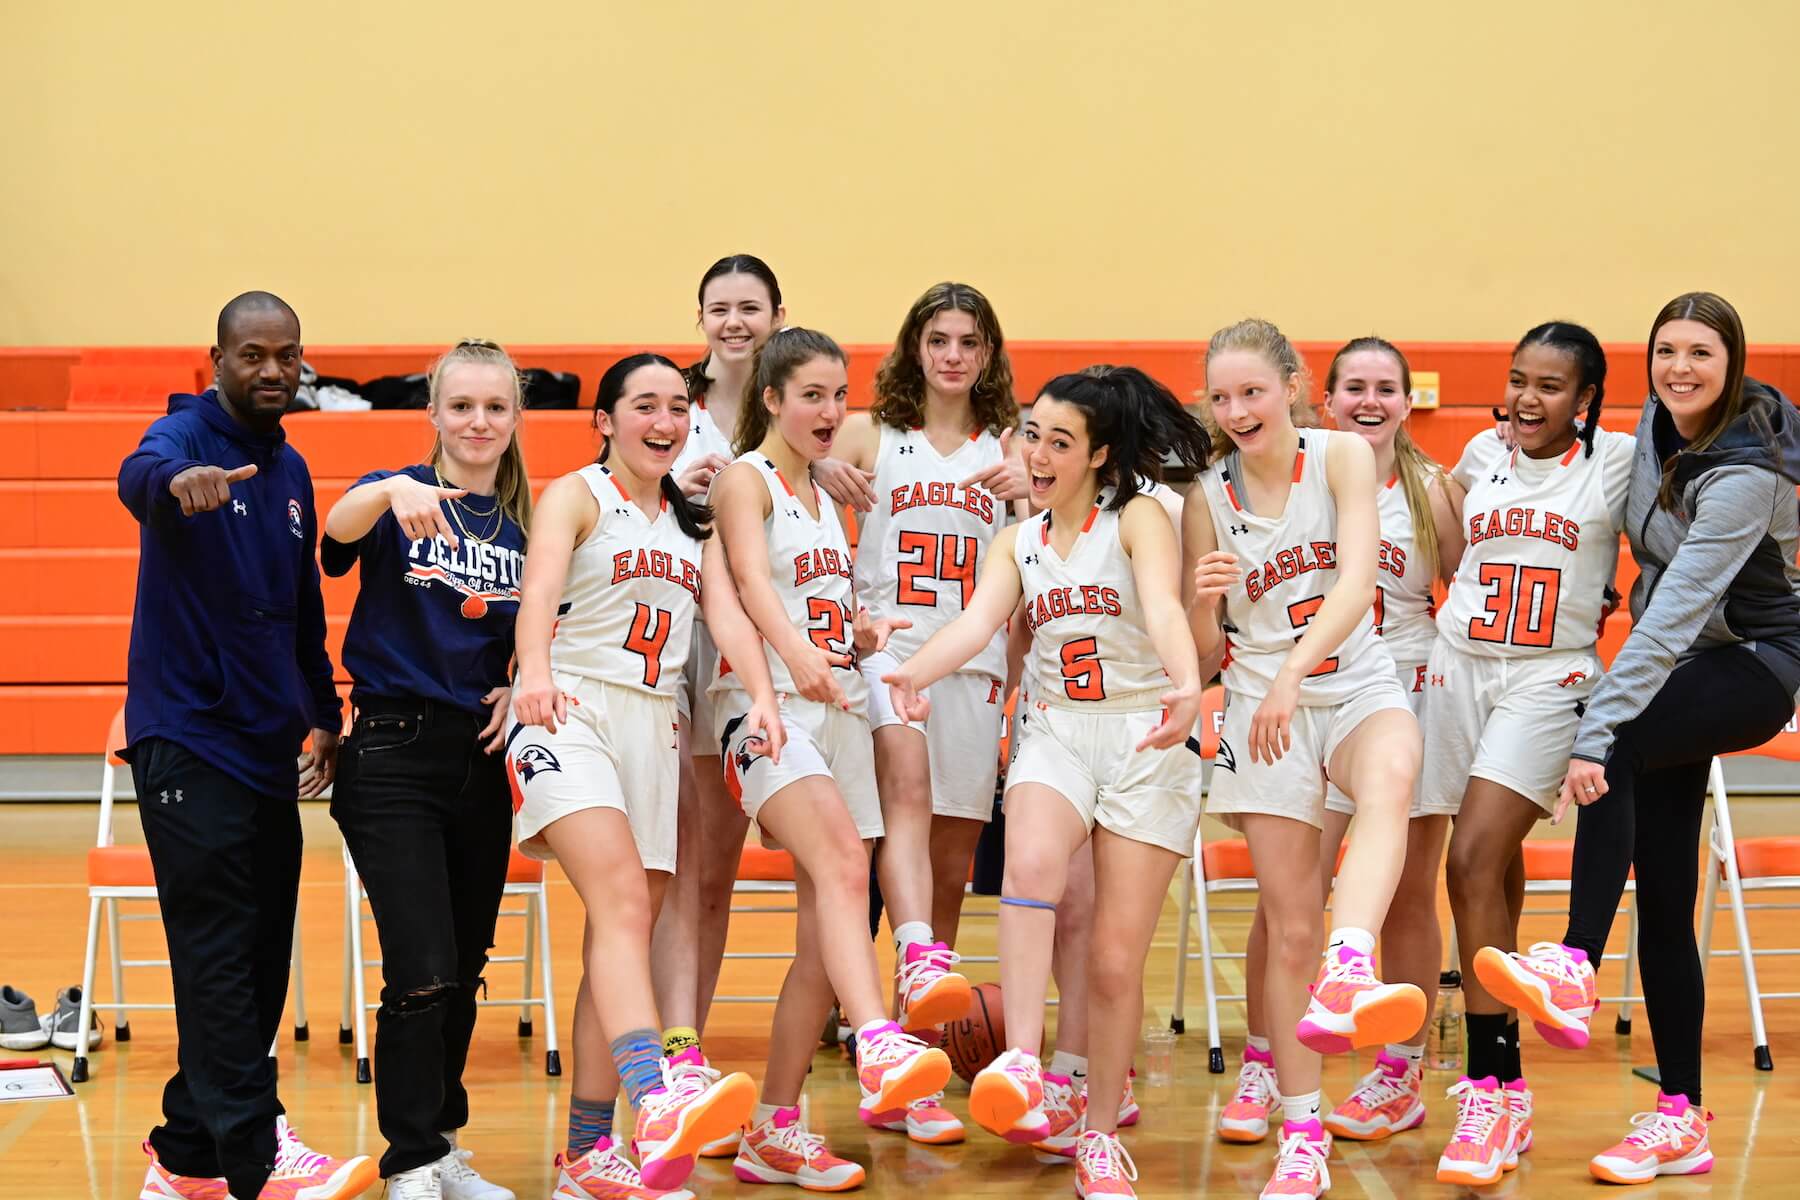 Ethical Culture Fieldston School Basket Ball Team gathers for a photo on the court